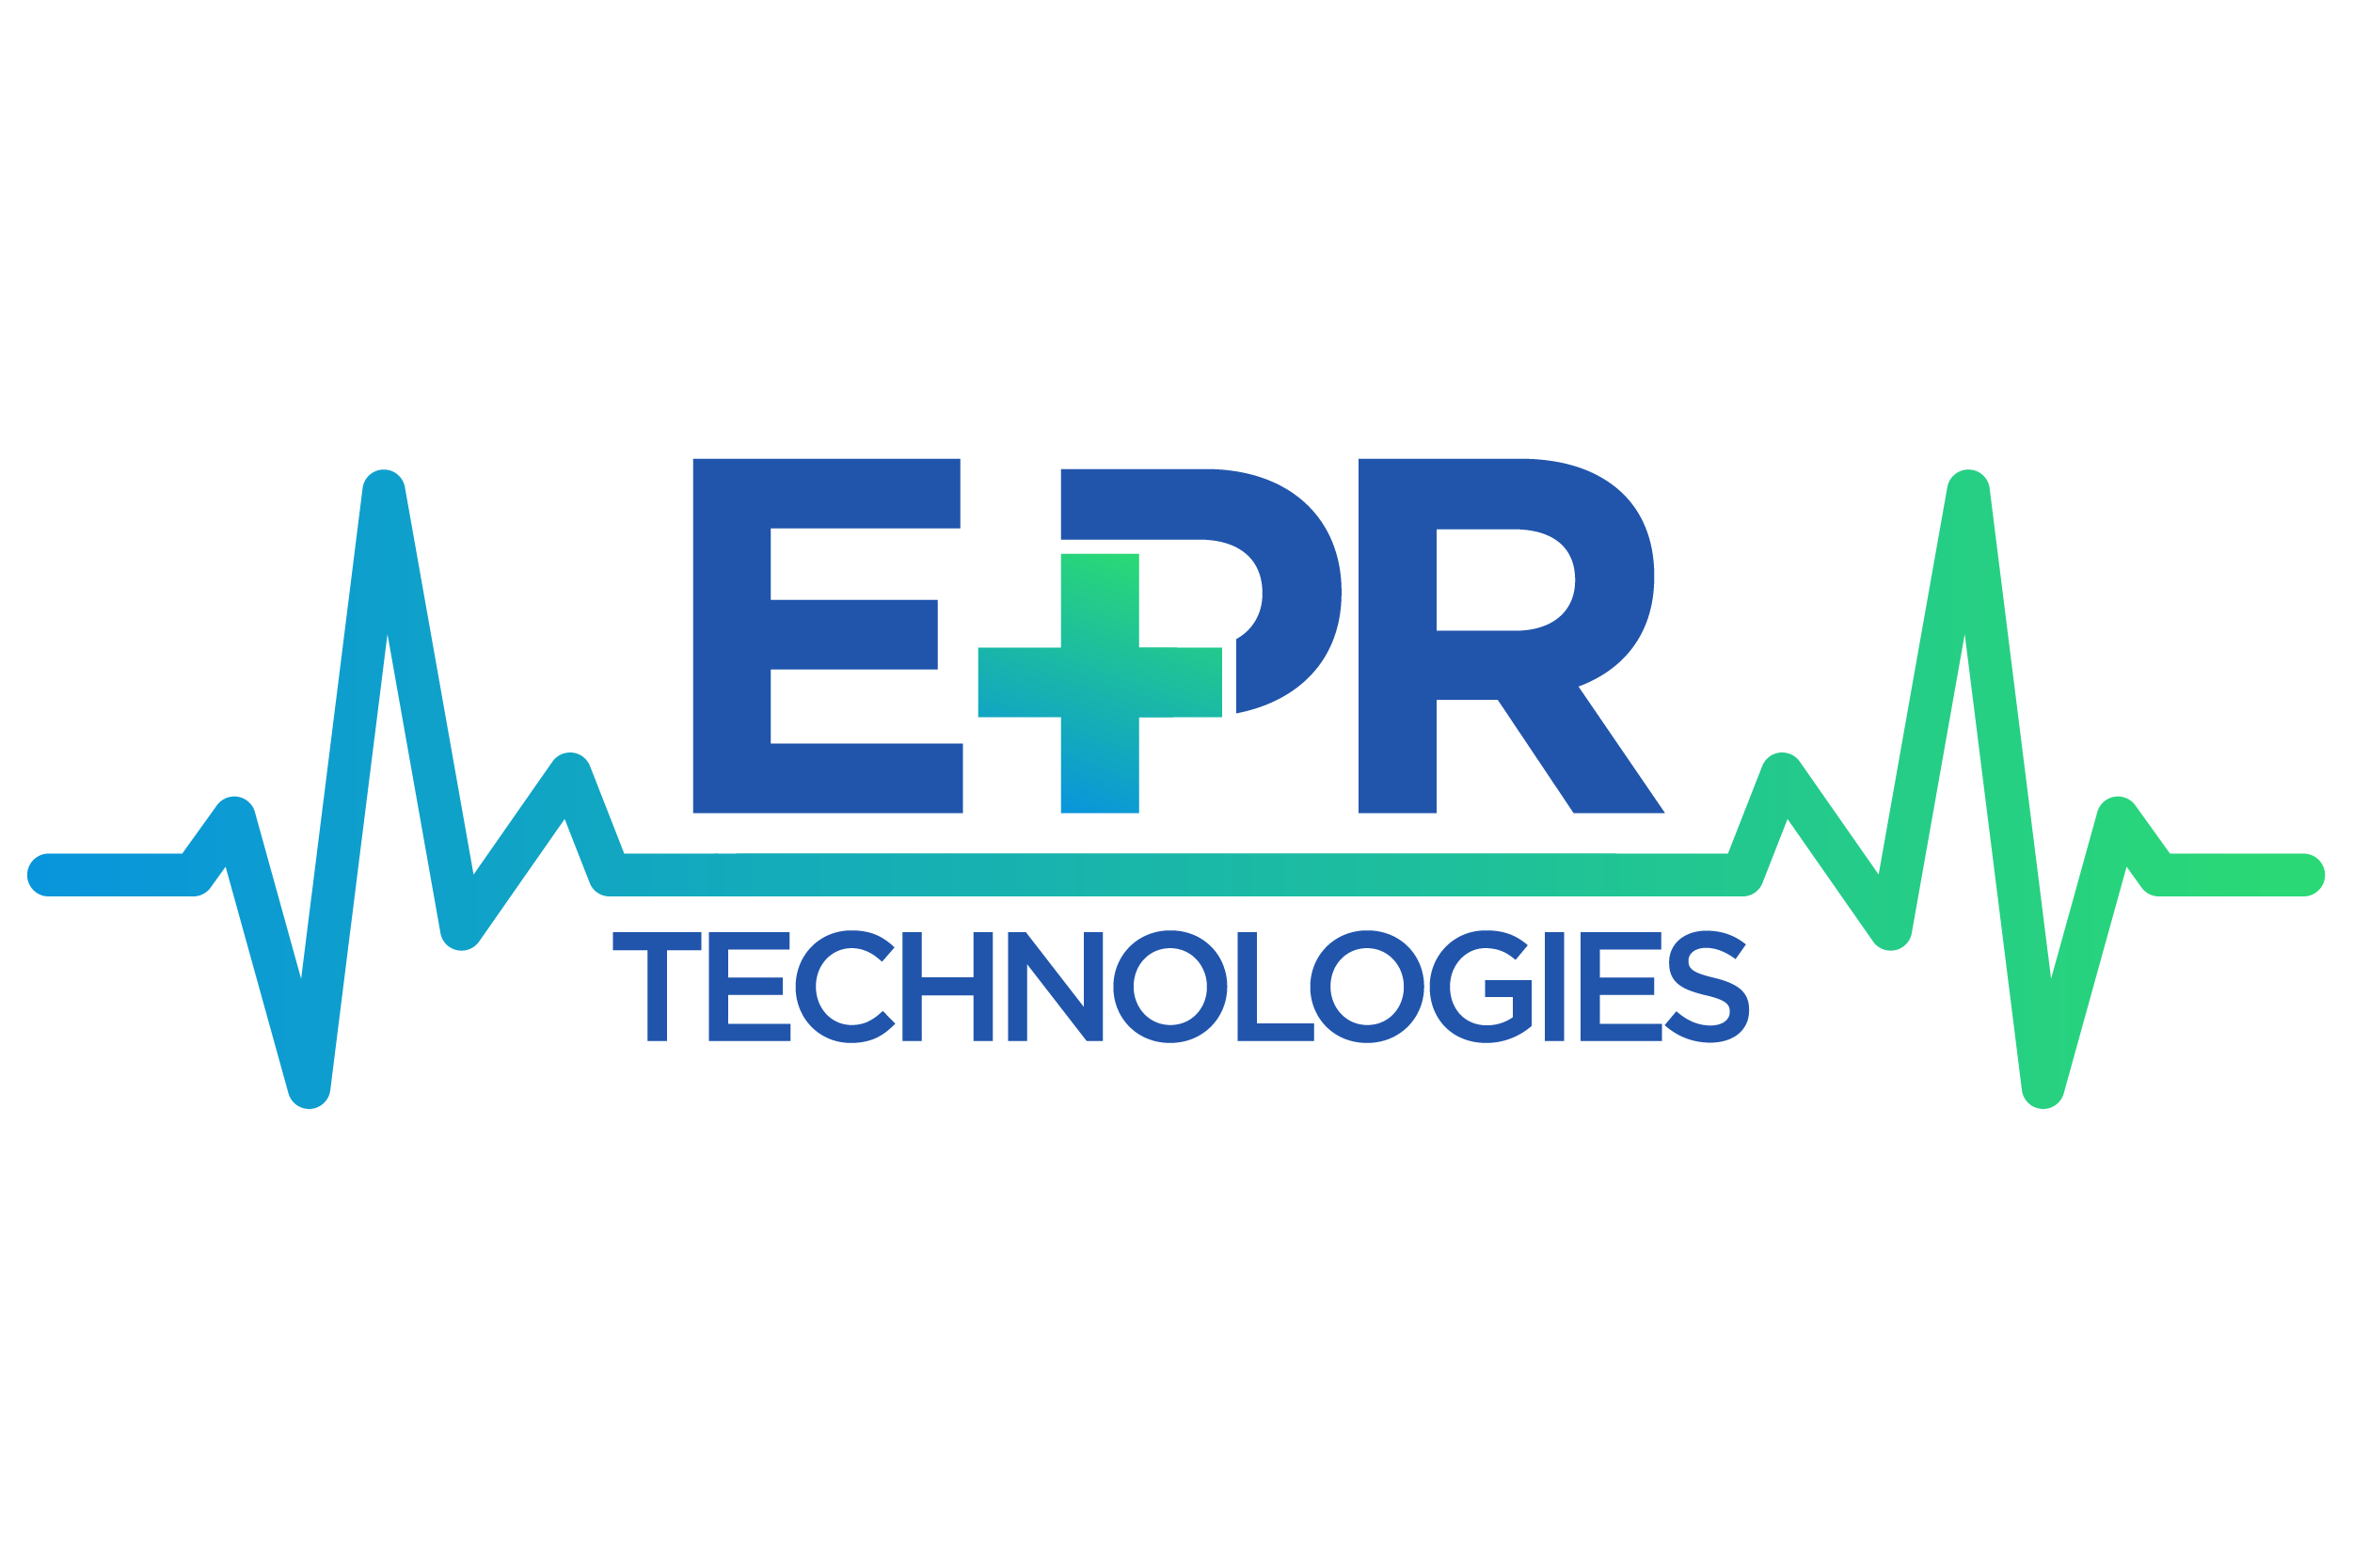 EPR-Technologies Is Pursuing A New, Innovative Approach To Emergency Care When Cardiopulmonary Resuscitation (CPR) Fails